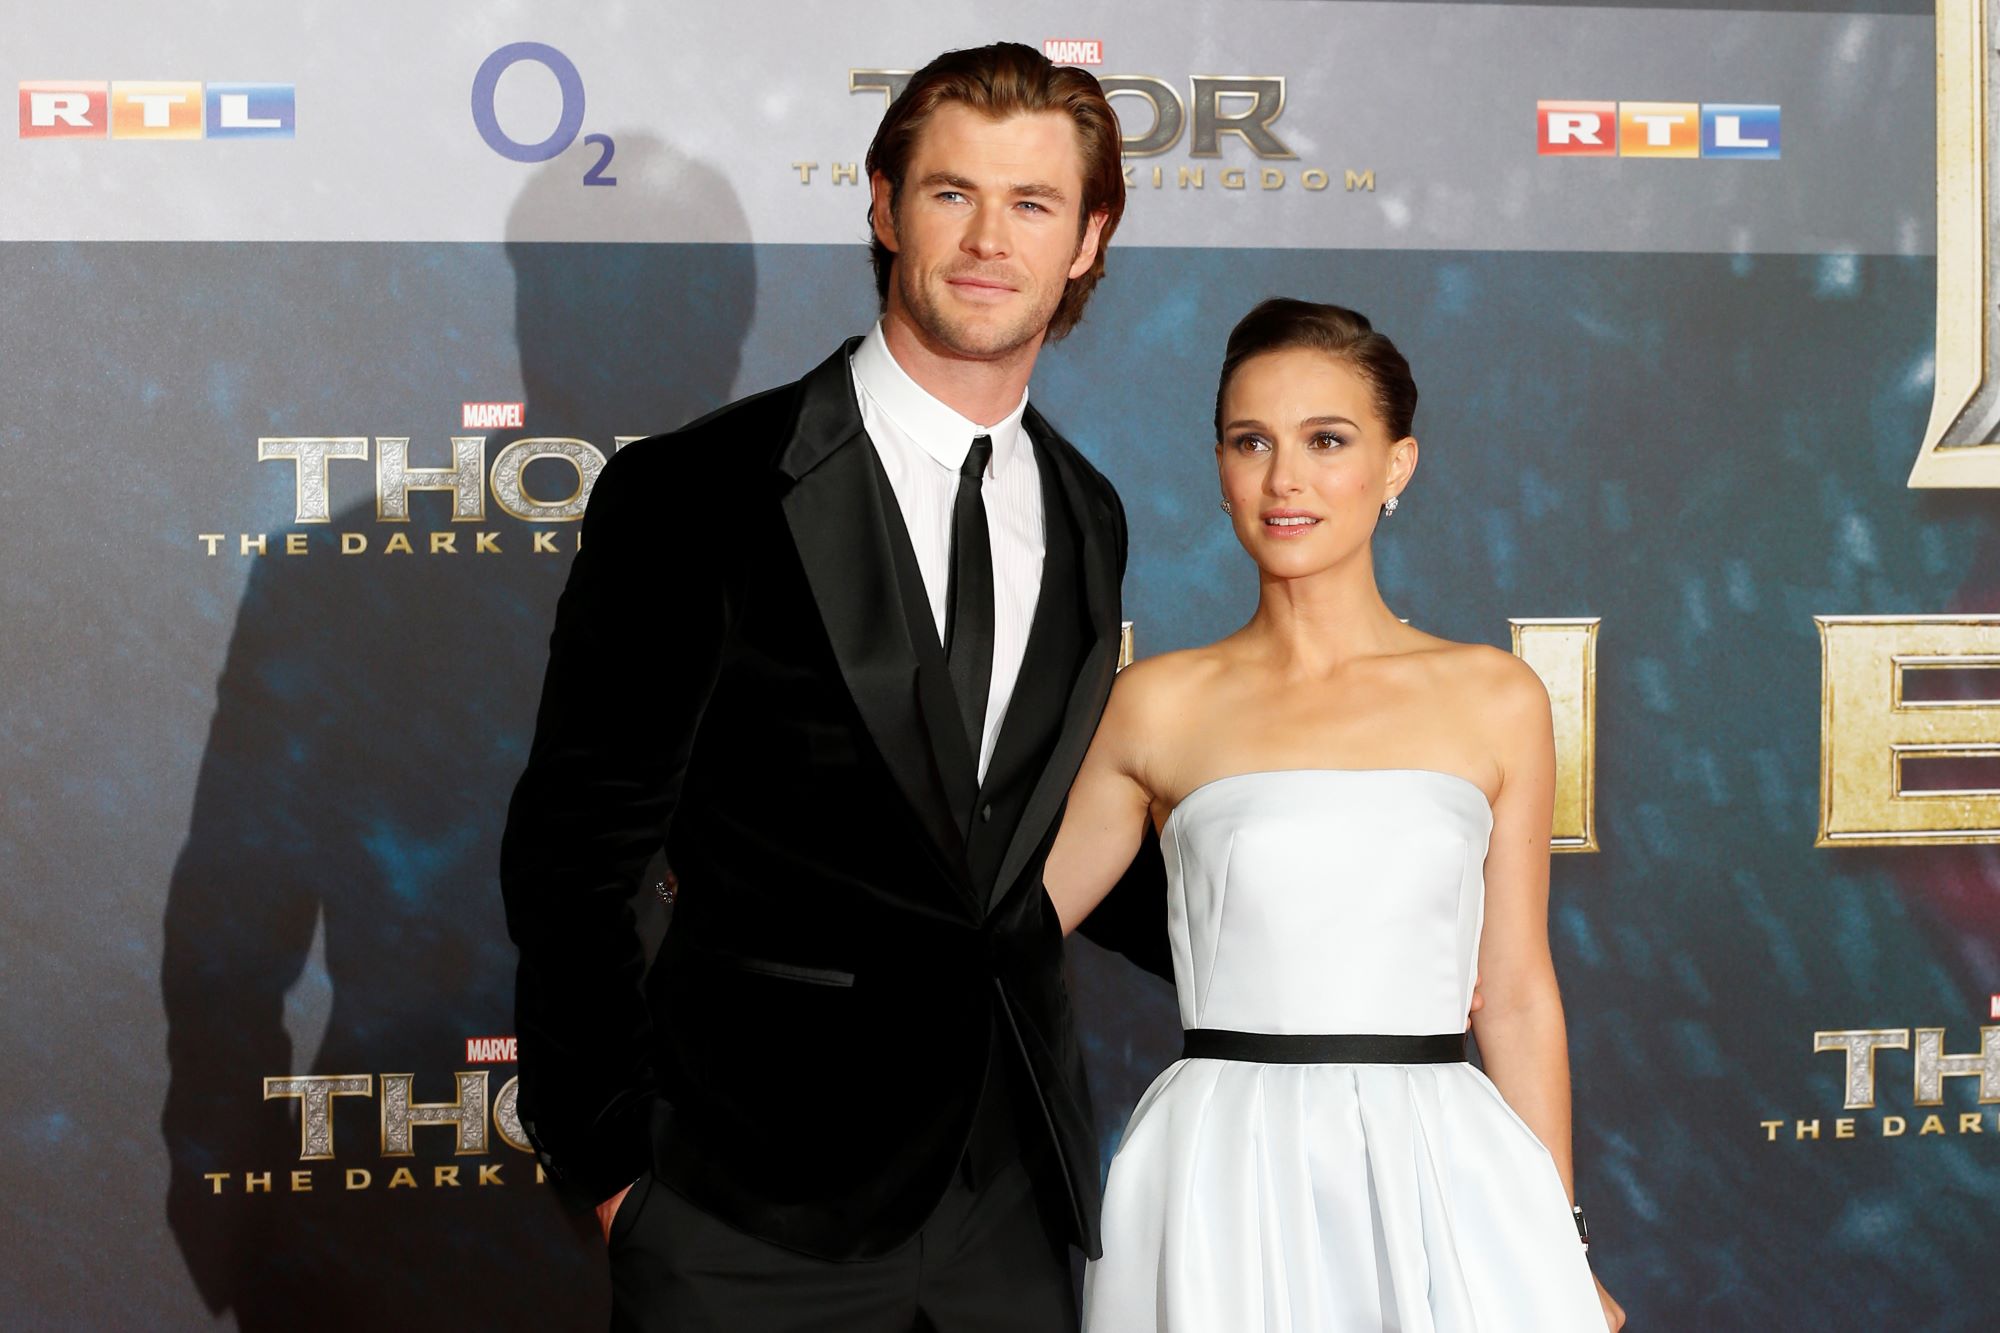 Chris Hemsworth and Natalie Portman, who star as Thor and Jane in the 'Thor: Love and Thunder' trailer, pose for pictures together. Hemsworth wears a black velvet suit over a white button-up shirt and black tie. Portman wears a white strapless dress with a thin black ribbon around the waist.